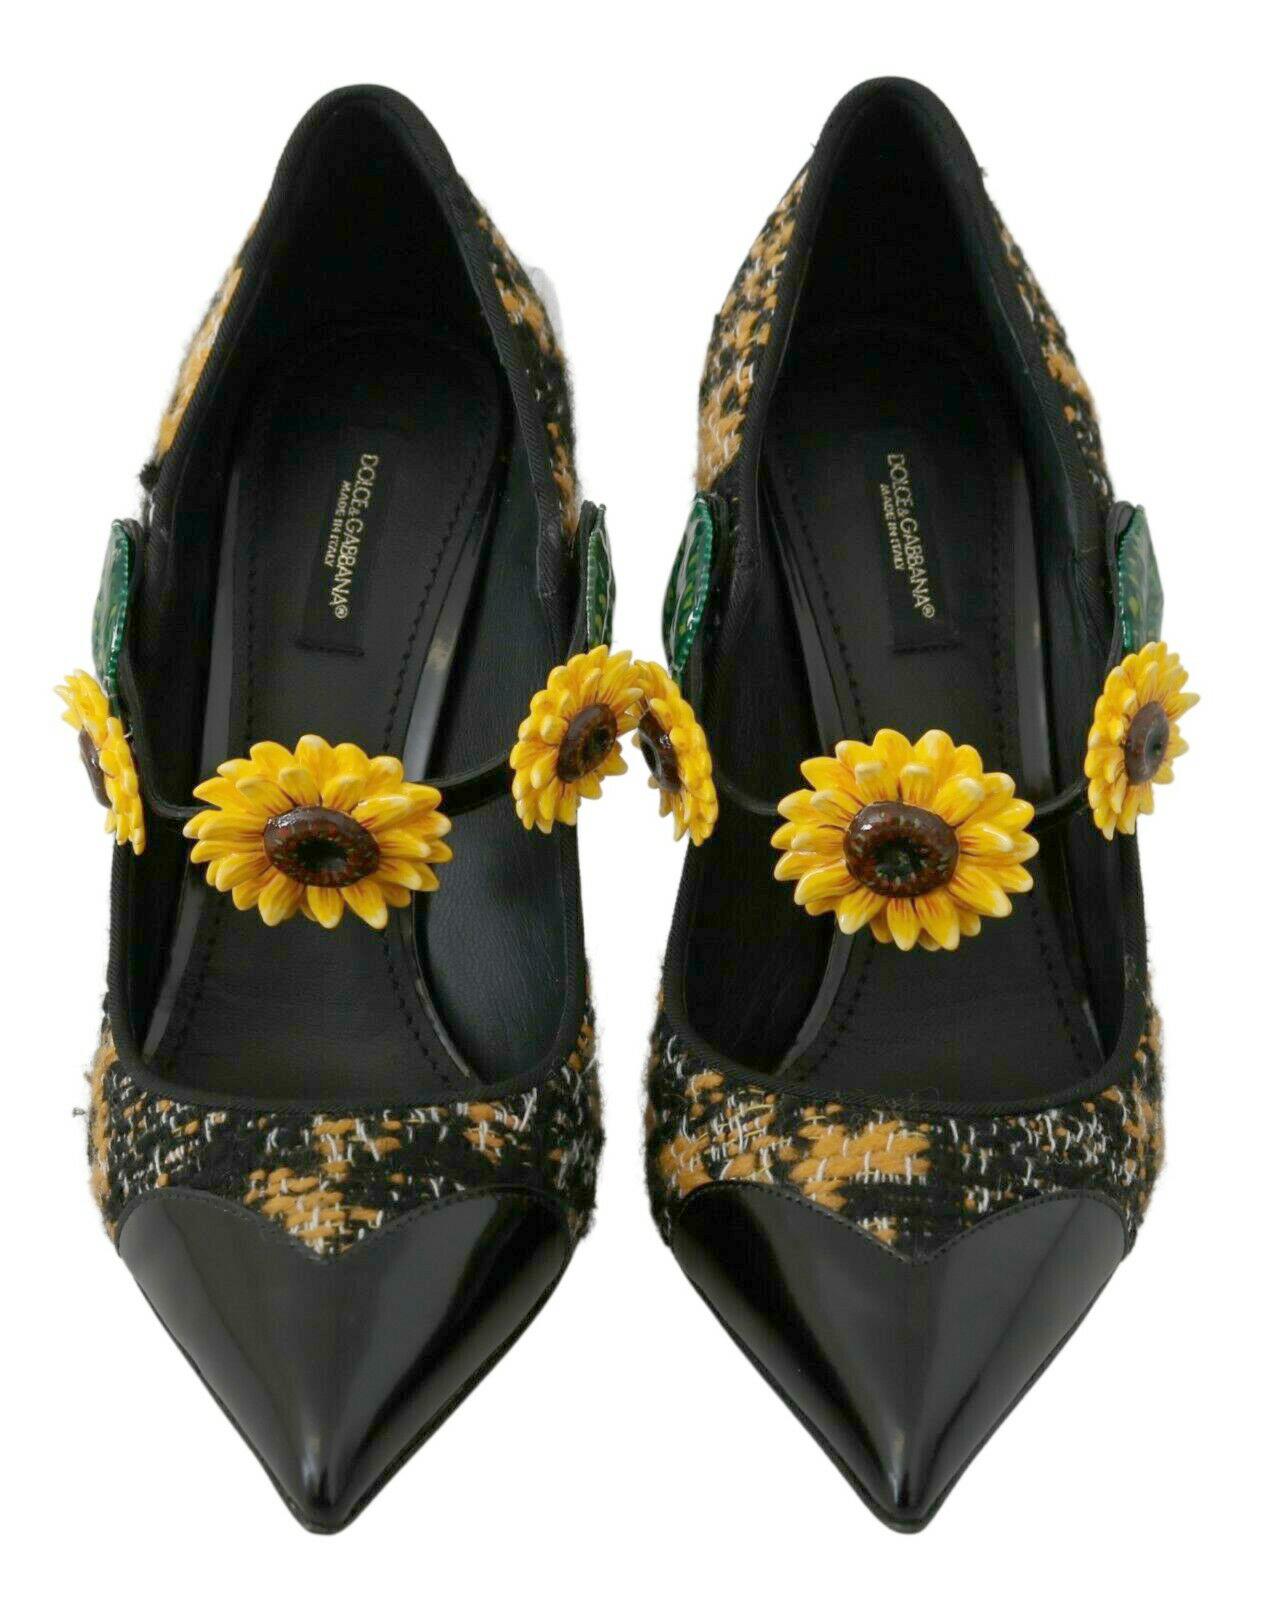 Dolce & Gabbana Black Yellow Mary Jane Leather Pumps Heels Shoes Floral Boucle 1